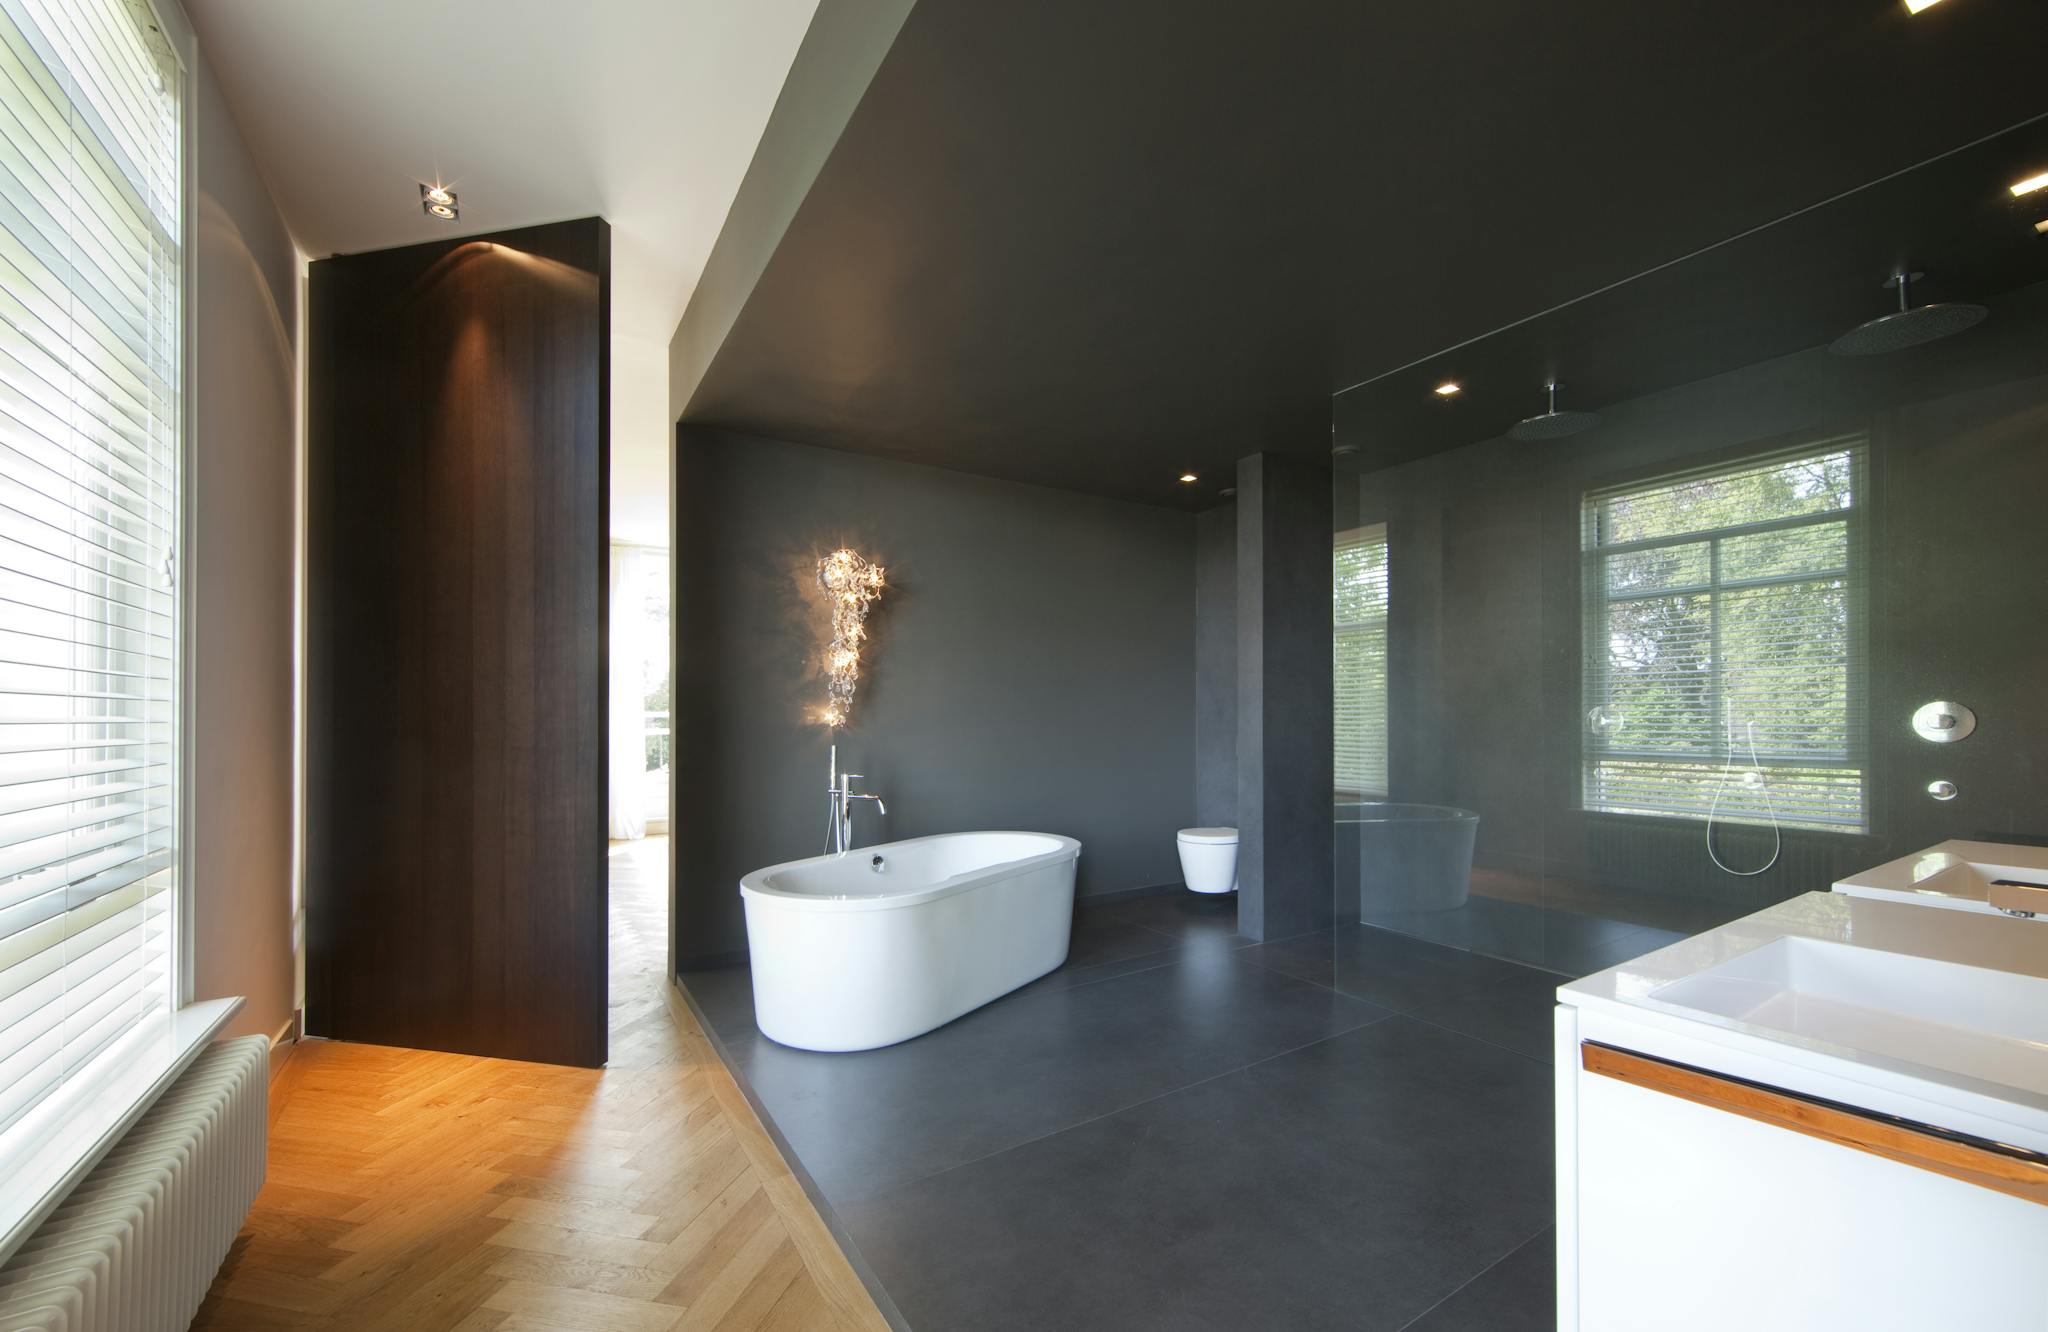 A dark tiled and wooden floored bathroom with a large pivoting door in dark wood.